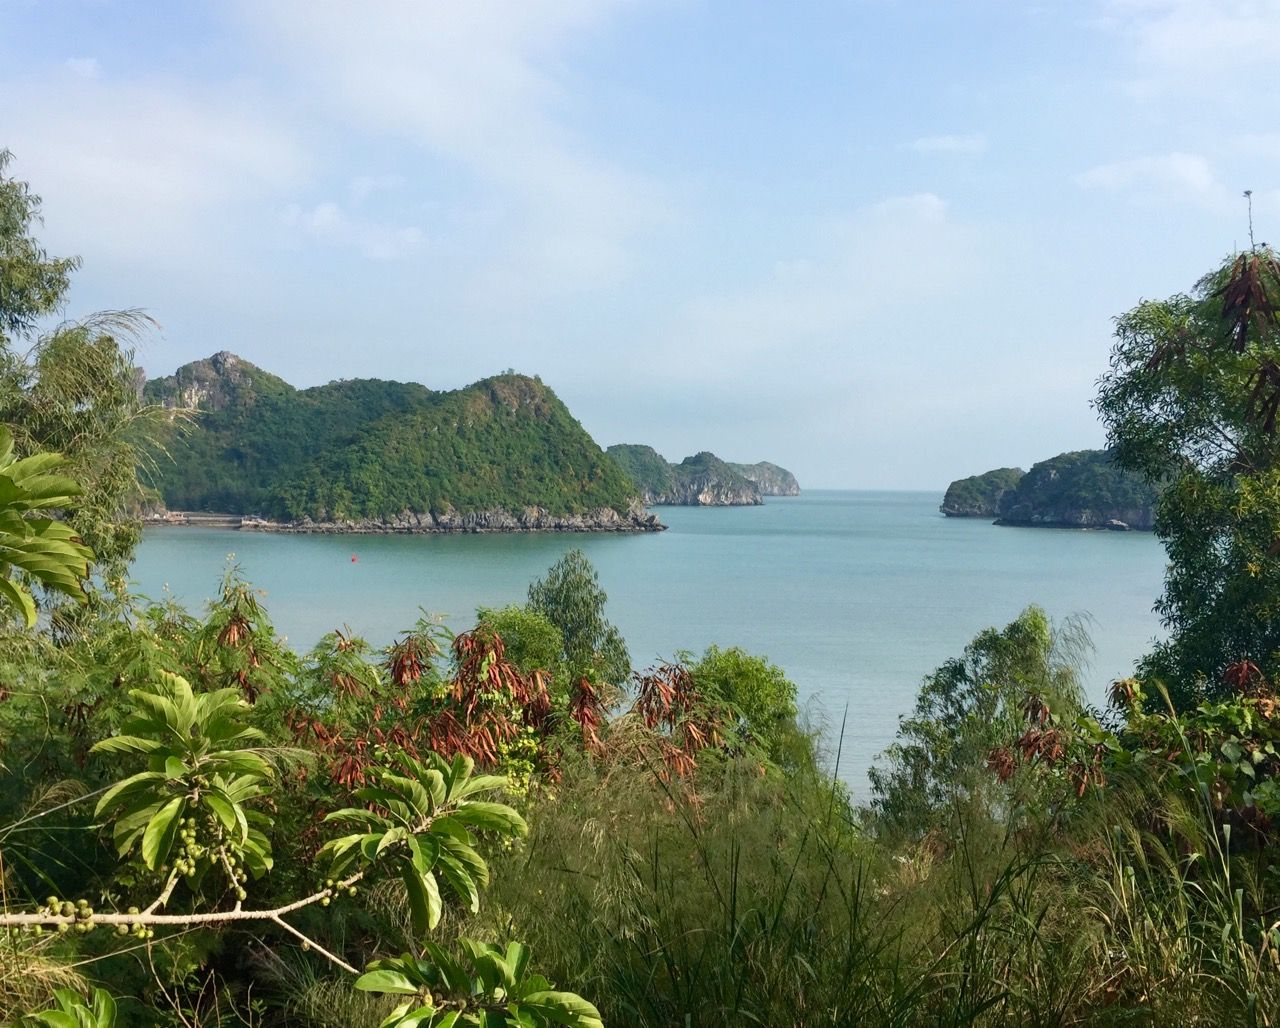 View of Cat Ba Harbor from higher ground.